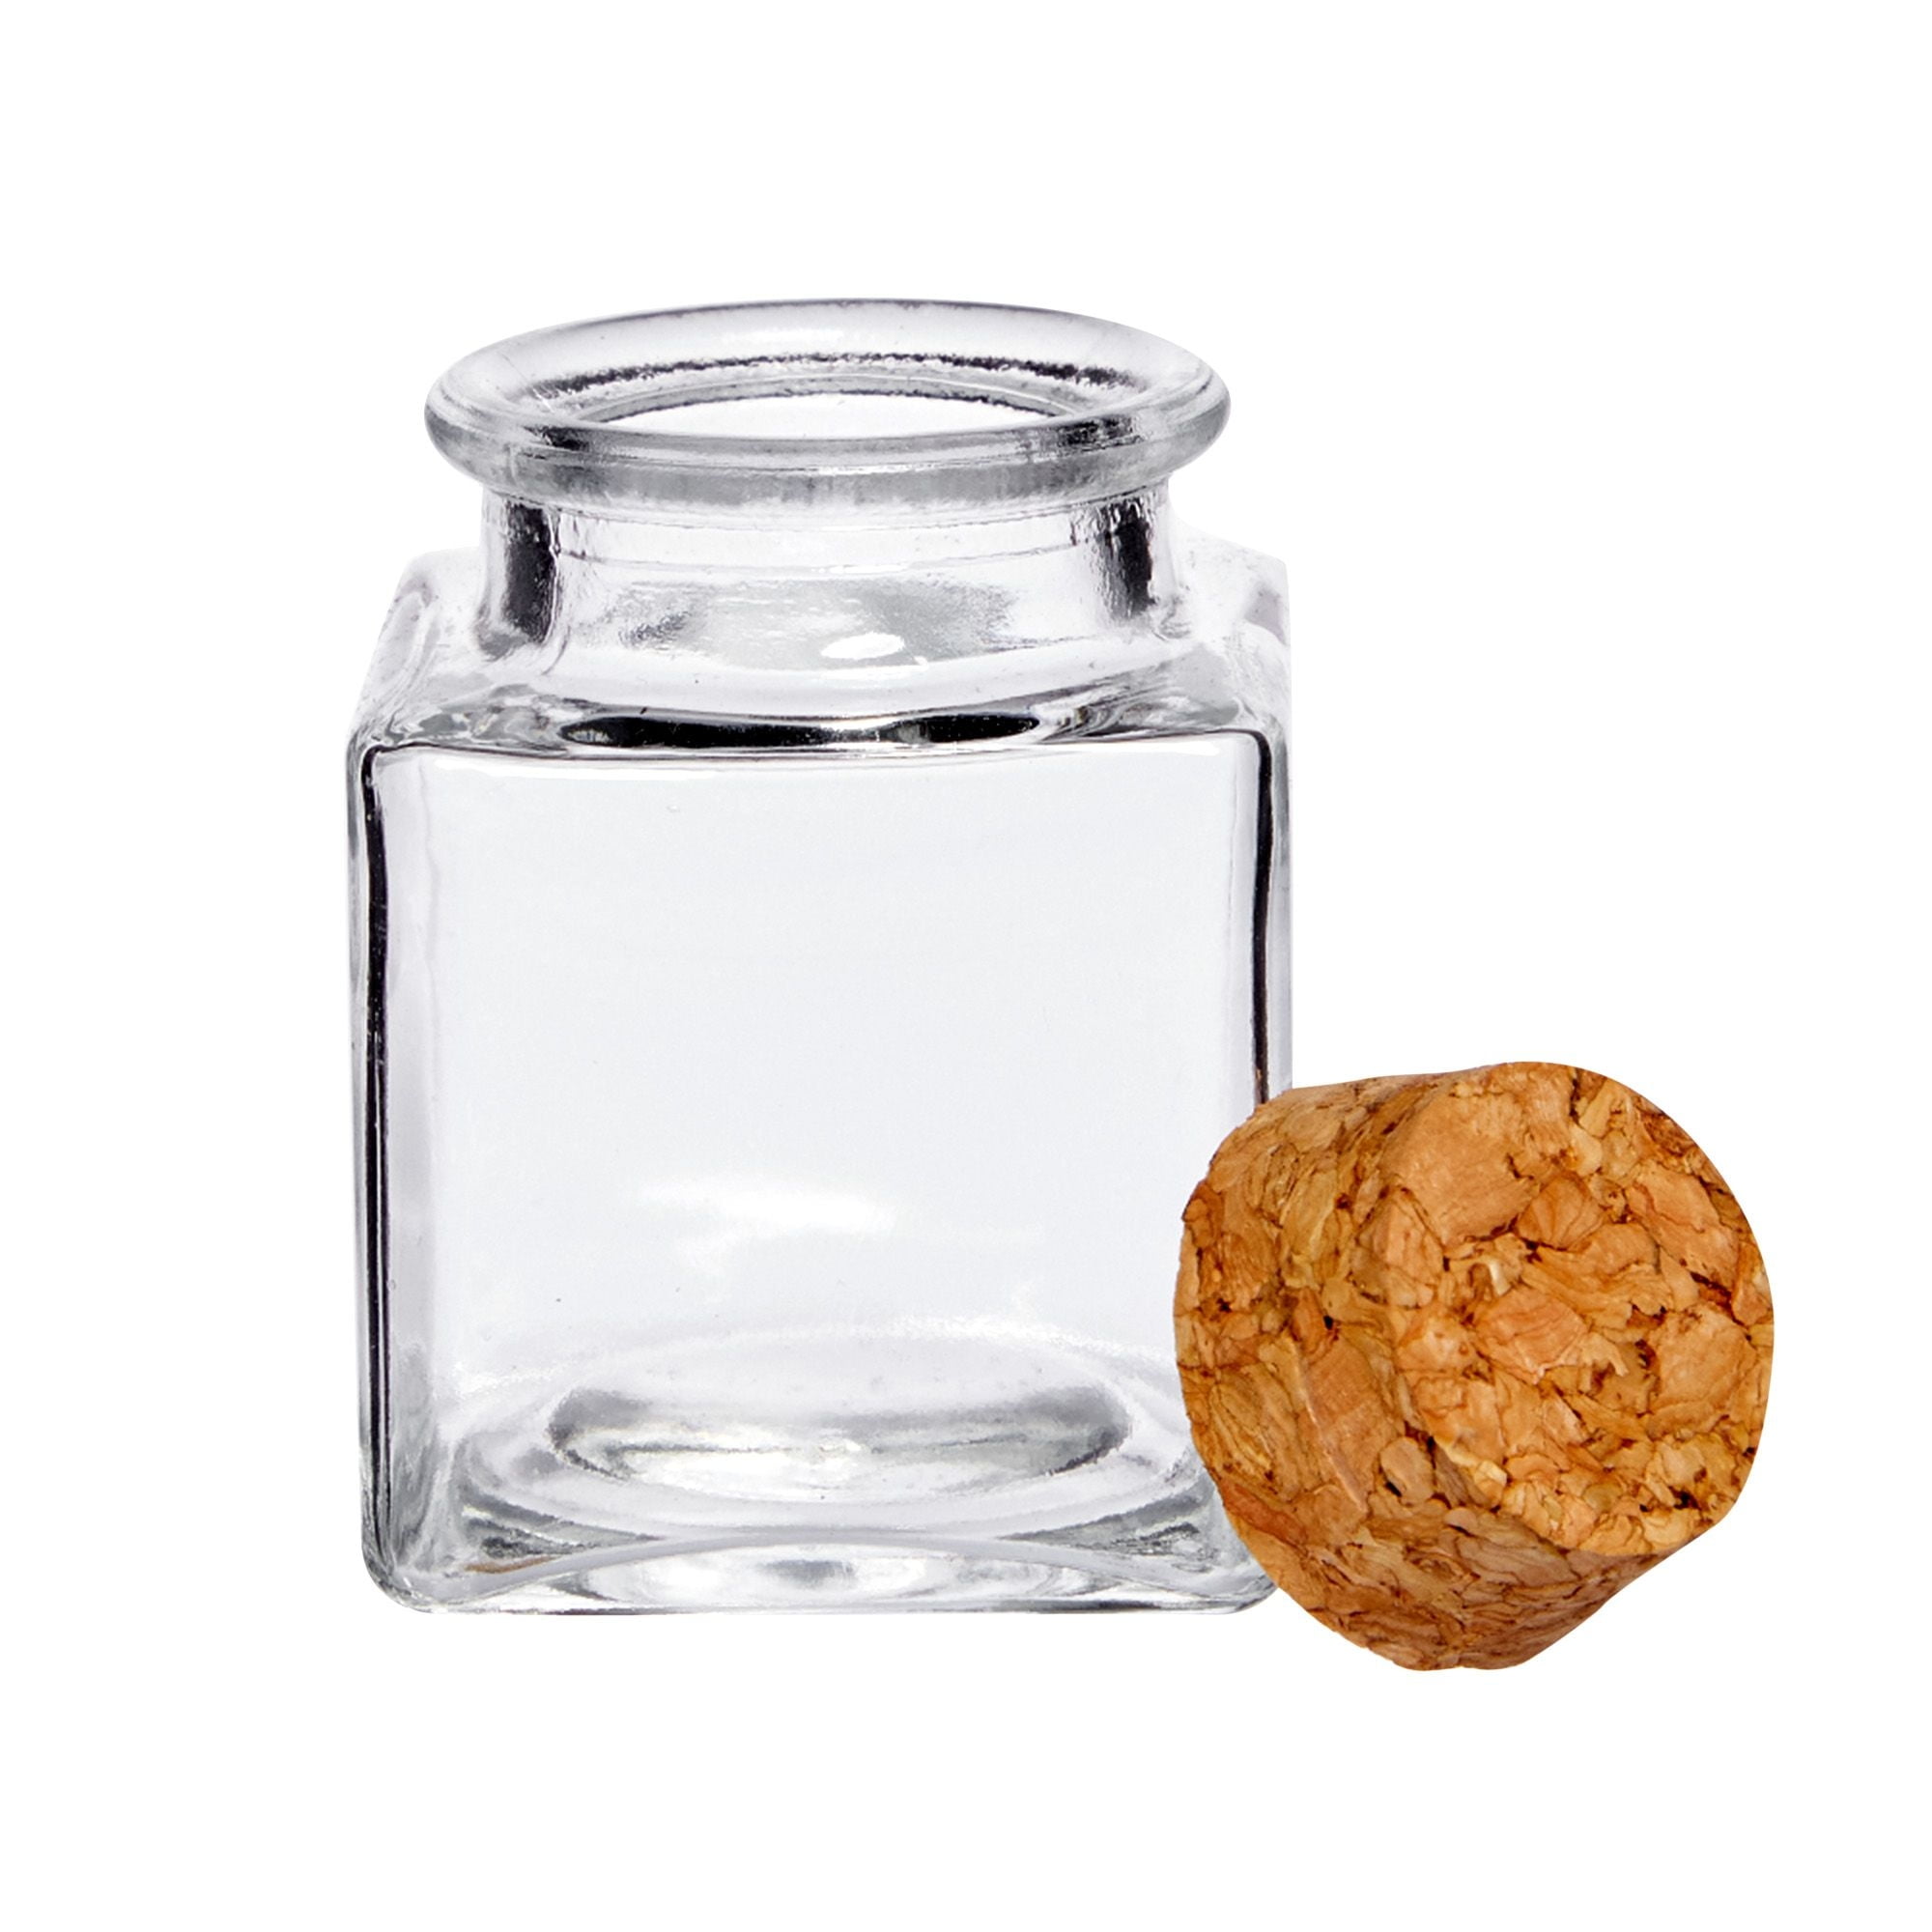 Small Glass Canister with Cork Top Set of 2 by World Market